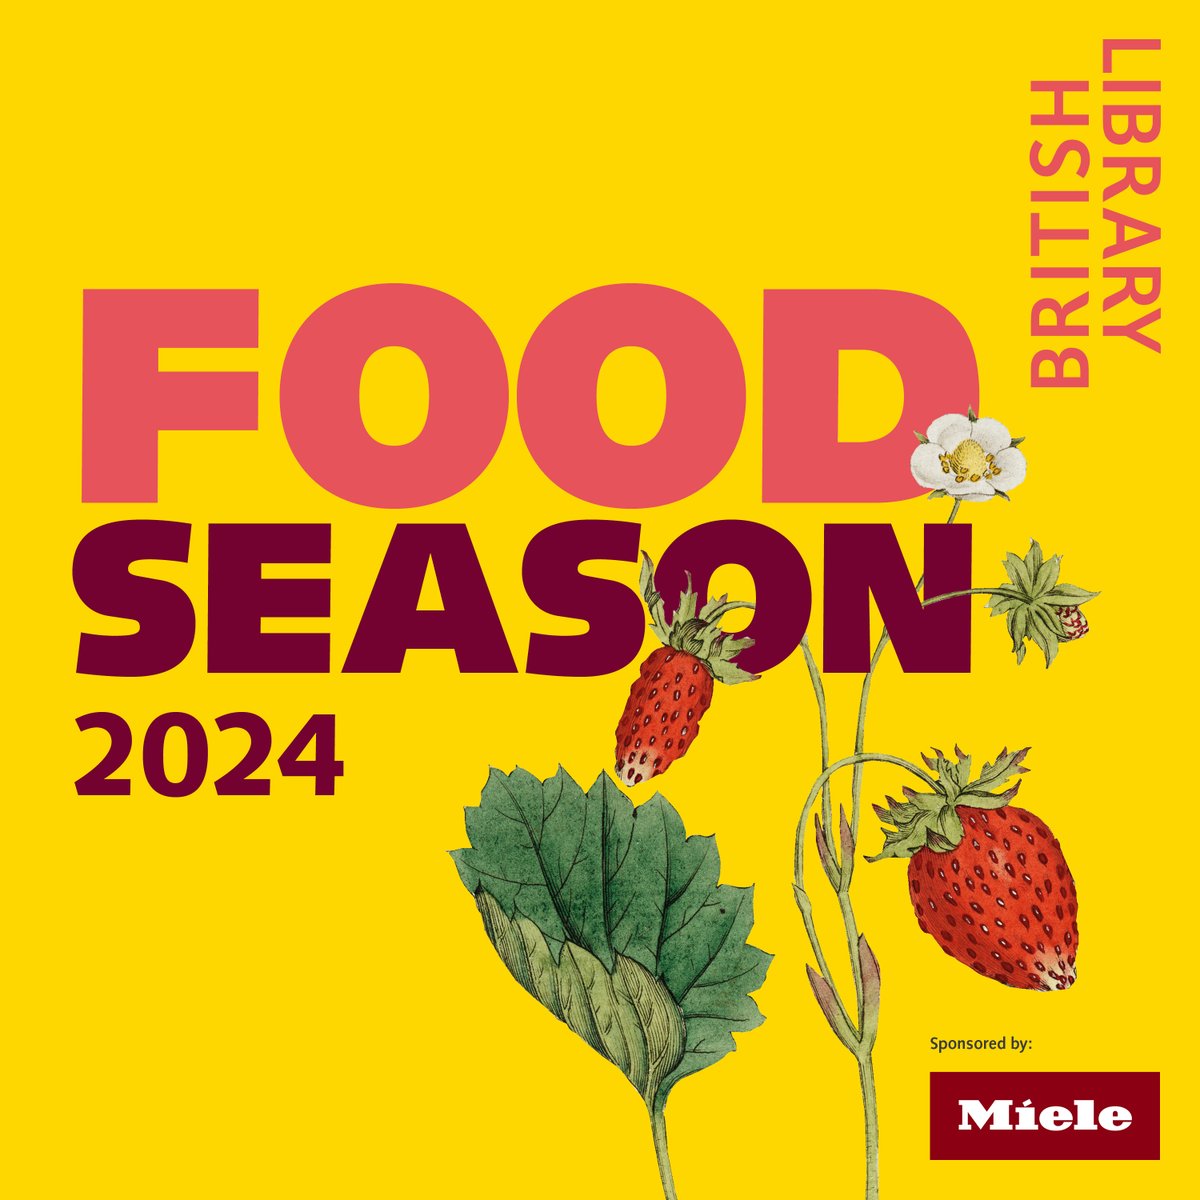 Let's taco 'bout our sixth Food Season: - The Psychological Impossibility of Eating Well with @FoodAndPsych & @DoctorChrisVT - Table Manners, with special guest @jordanfstephens - Big Weekender, a two-day celebration And plenty more: bit.ly/BLFoodSeason20… Sponsored by Miele